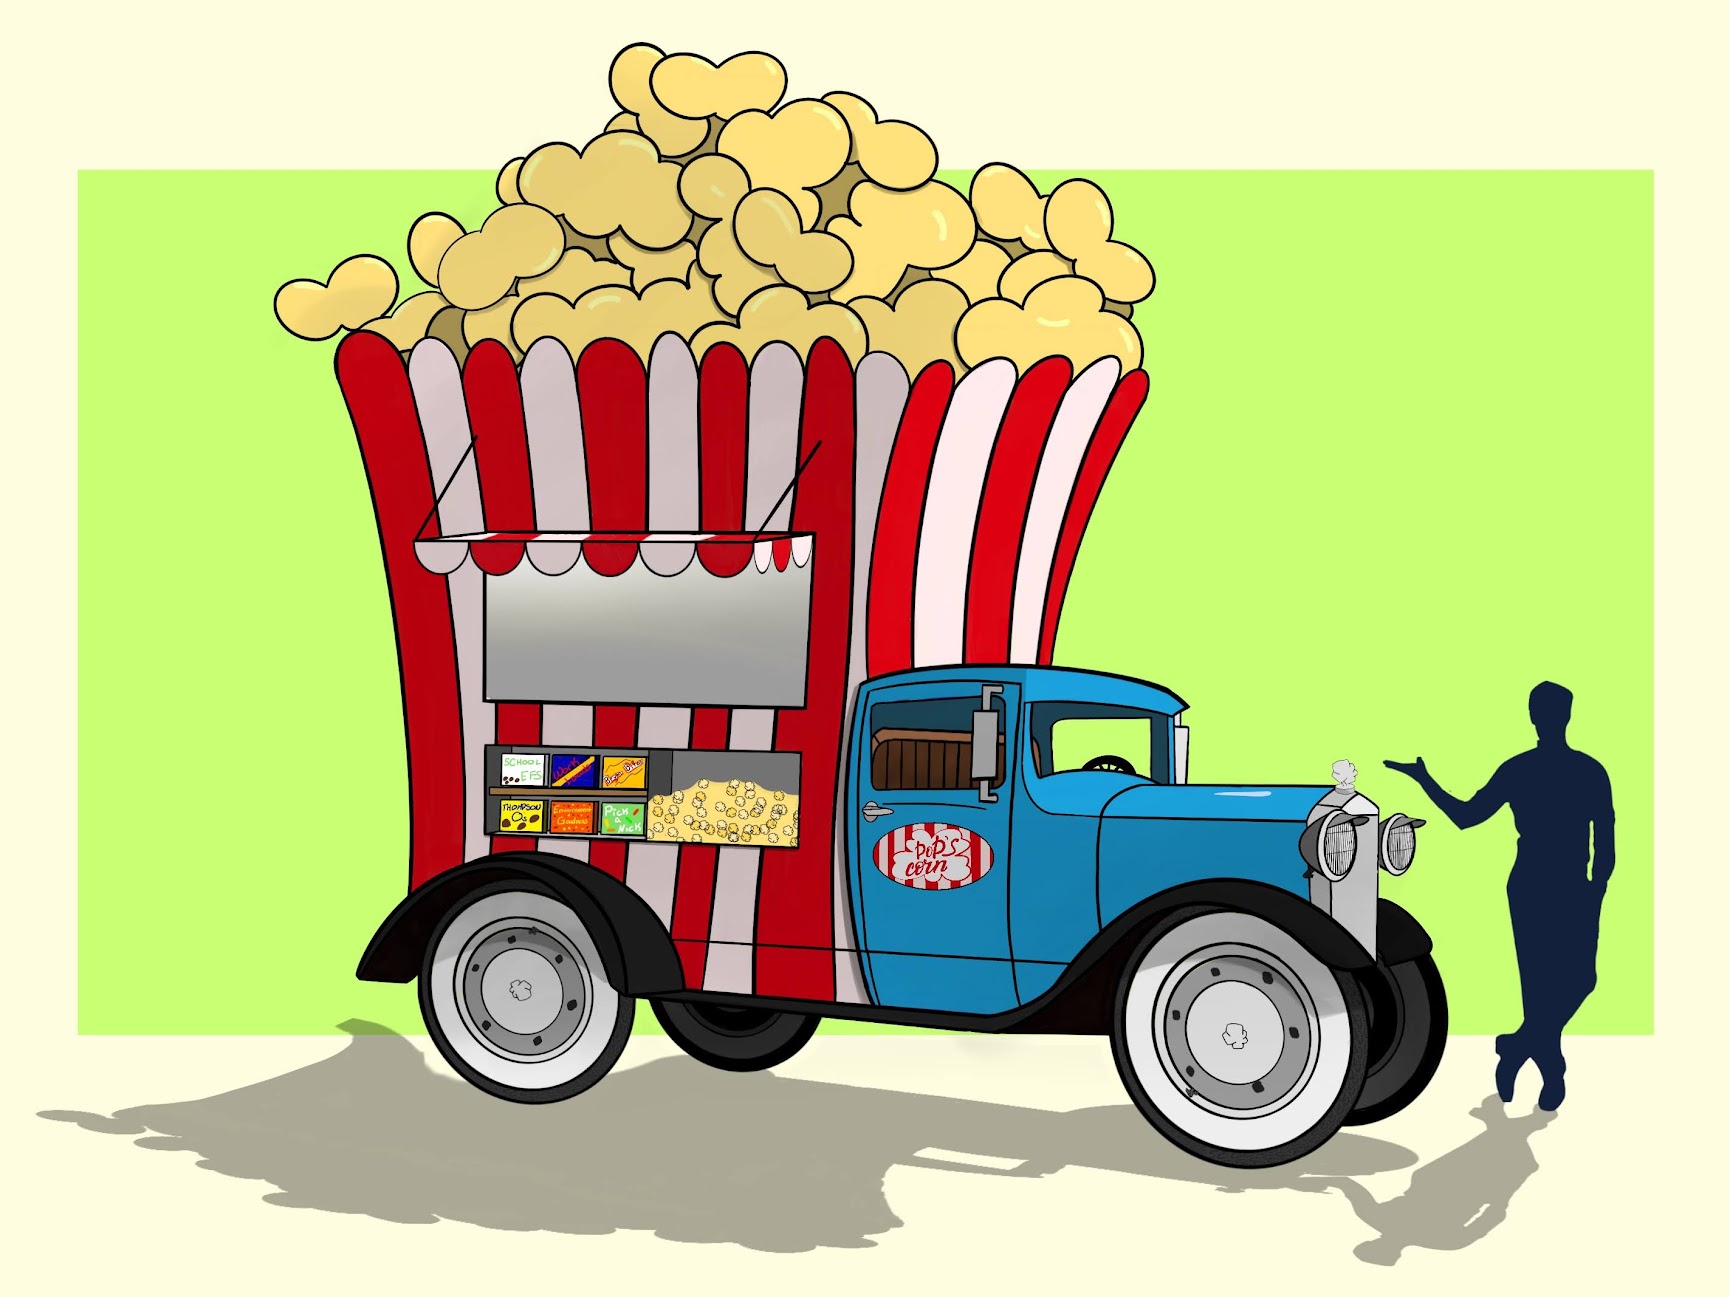 Pop's Corn: A Food Truck Story / Sketch of Pop's popcorn food truck for "Pop's Corn: A Food Truck Story", a developing animated short created using Procreate and Photoshop.